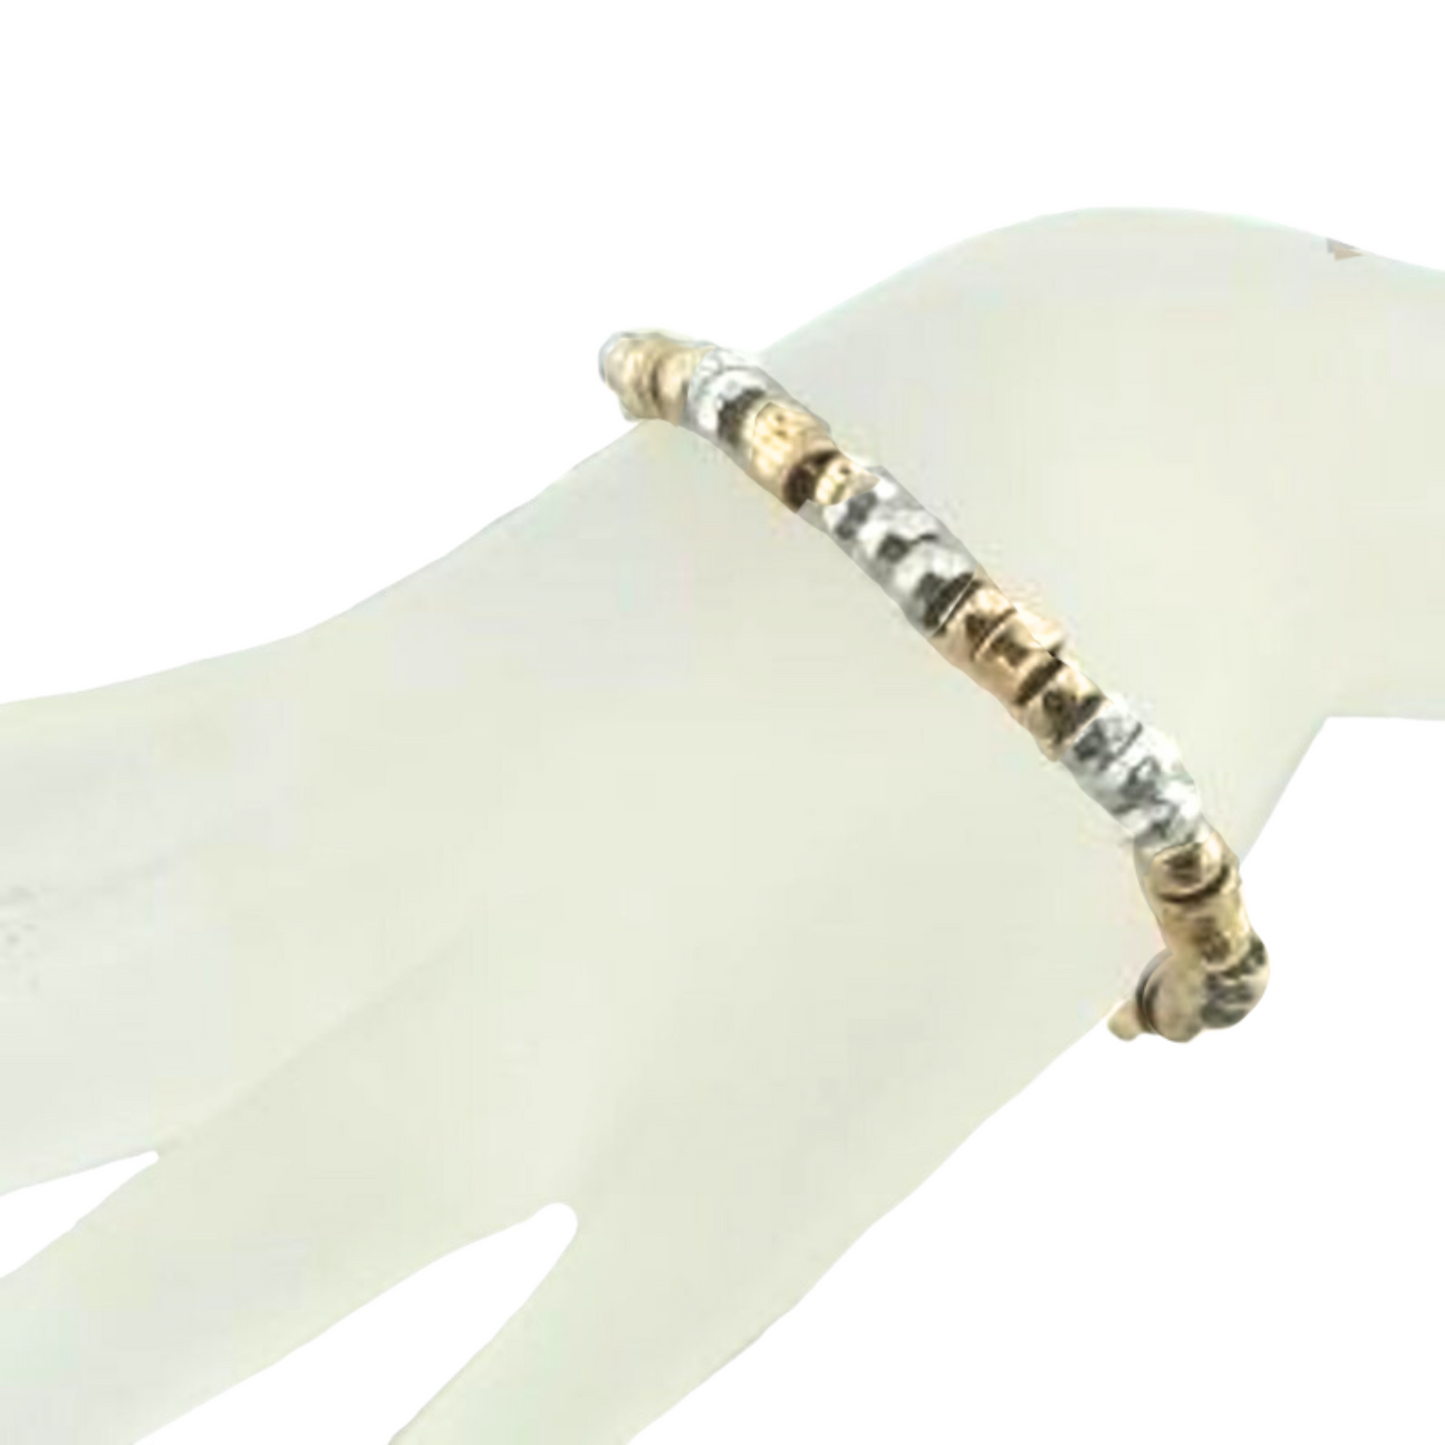 The Bracelet is made of solid Sterling silver and a Yellow gold-filled, 14K. Highlighting the sparkling Solid metal beads.